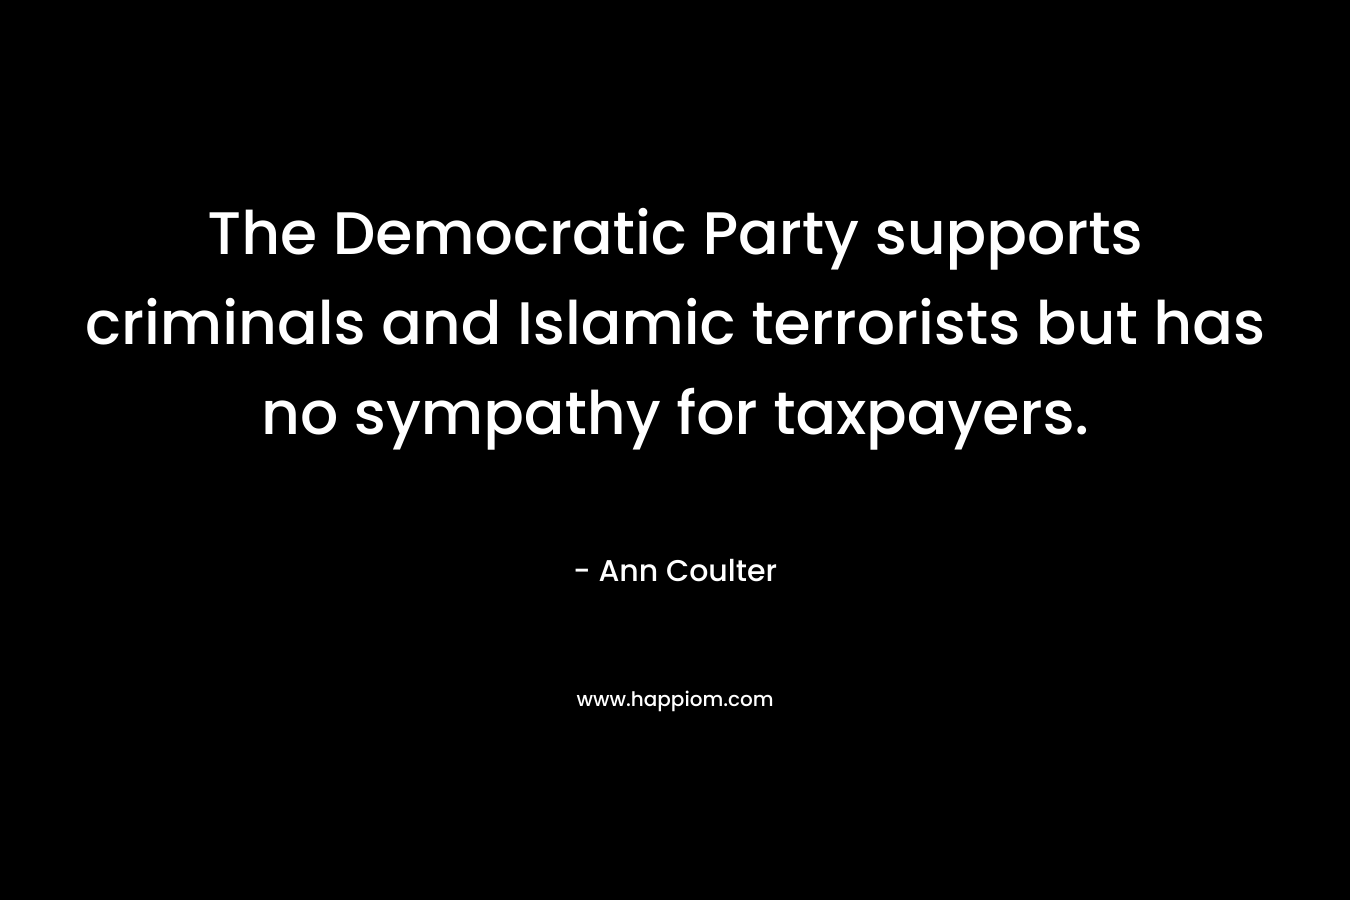 The Democratic Party supports criminals and Islamic terrorists but has no sympathy for taxpayers. – Ann Coulter